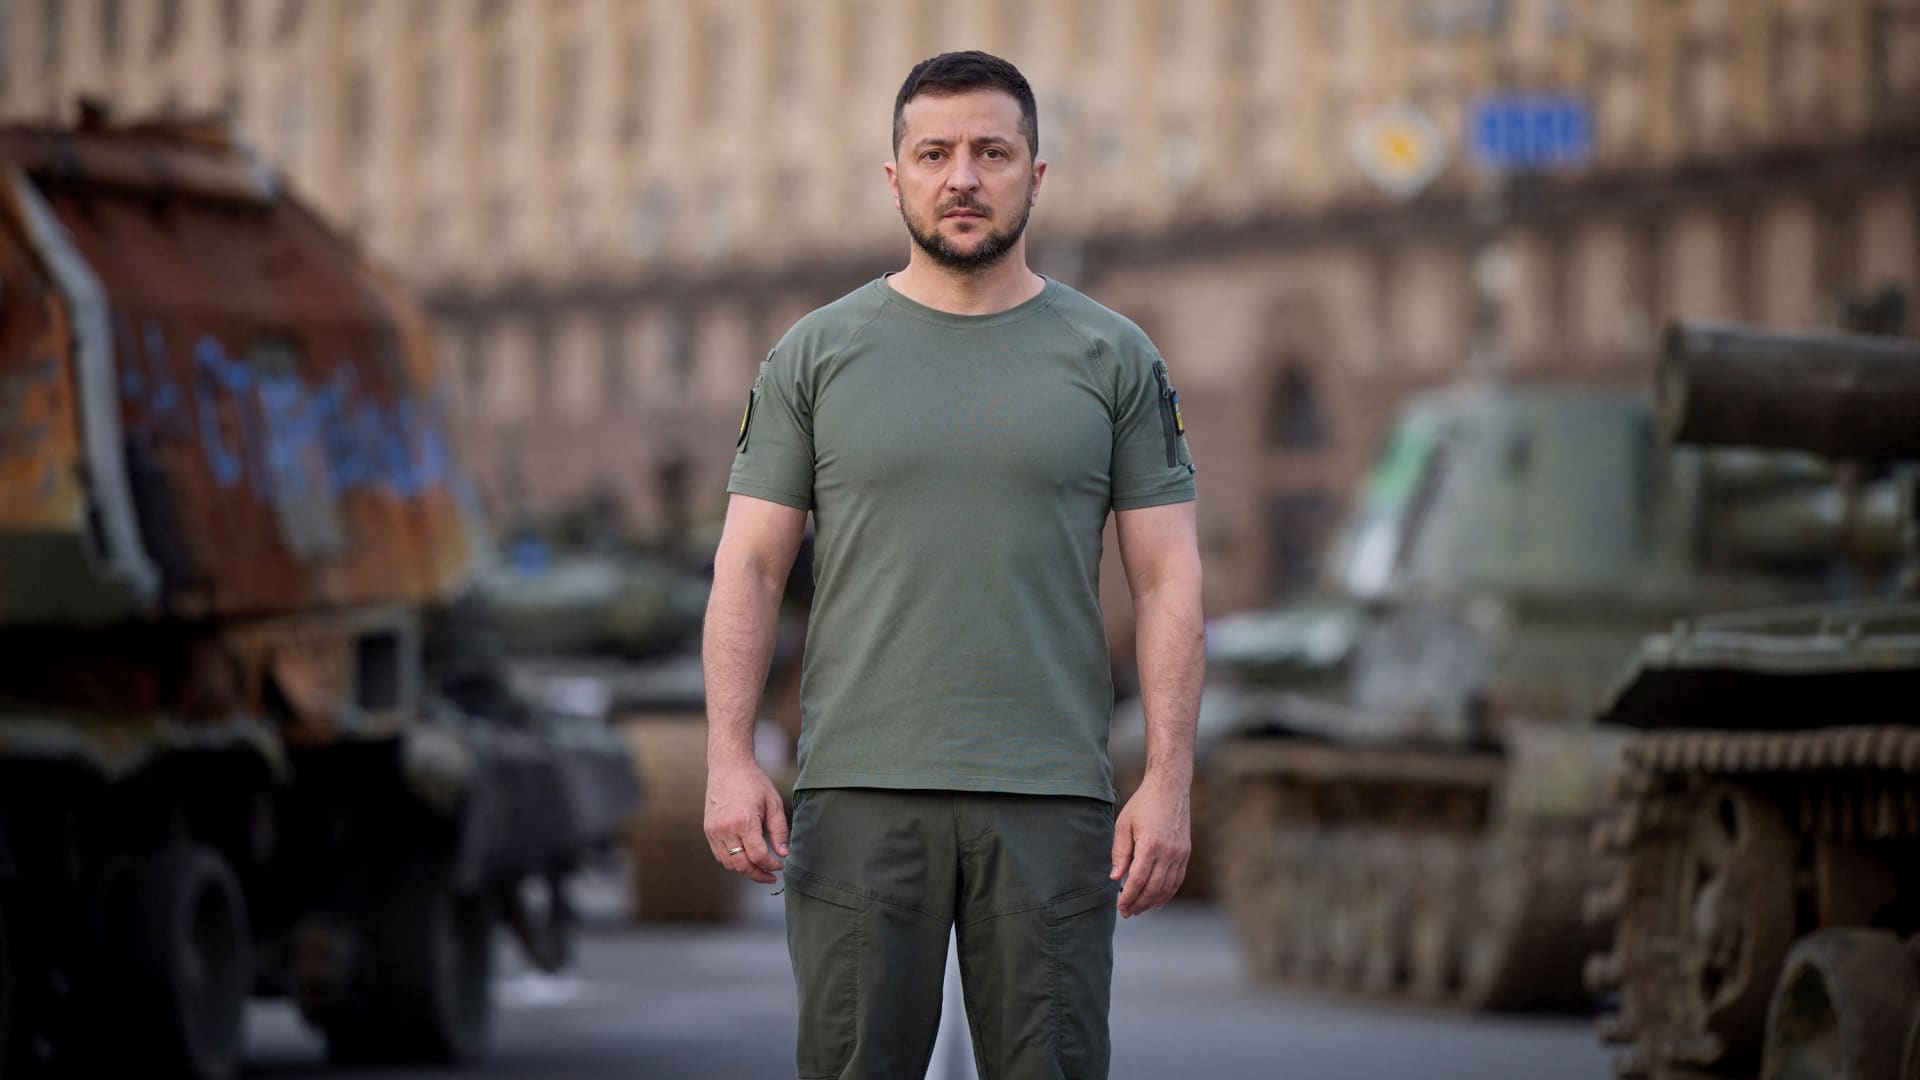 Ukraine's President Volodymyr Zelenskyy stands at Independence Square as he congratulates Ukrainians on Independence Day, amid Russia's attack on Ukraine, in Kyiv, Ukraine, in this handout picture released August 24, 2022.